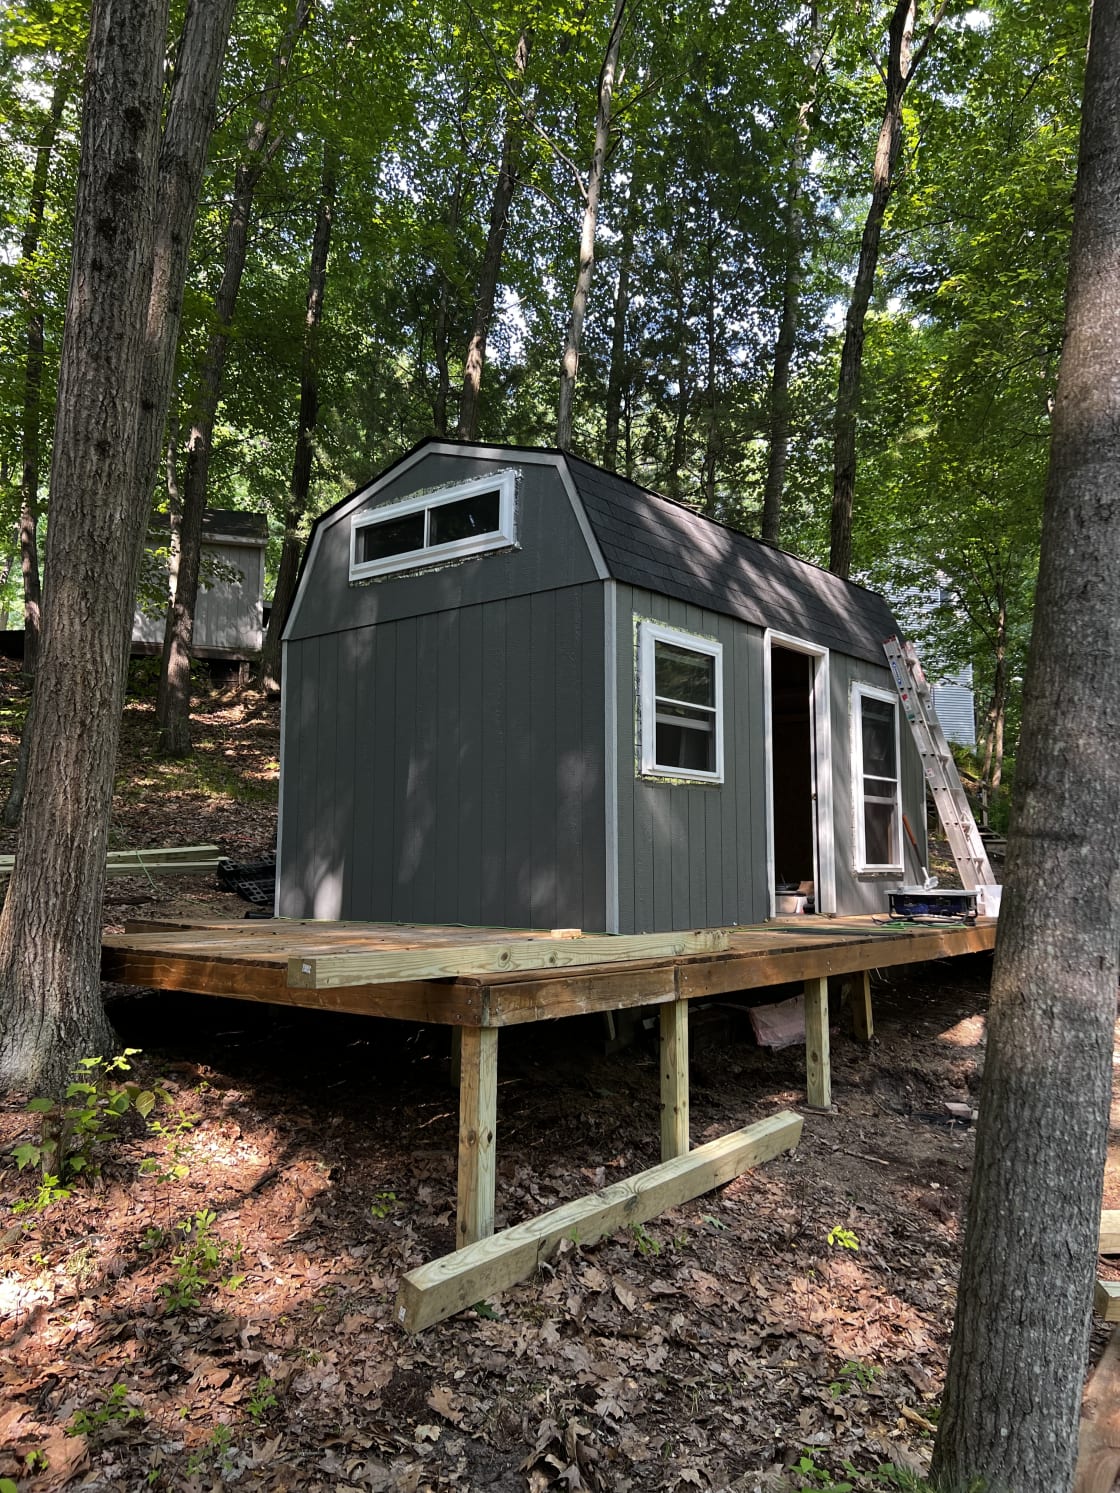 The 3-sided deck includes a grill and seating area. The outdoor shower stands in the rear of the cabin. It features a wall-surround open to sky